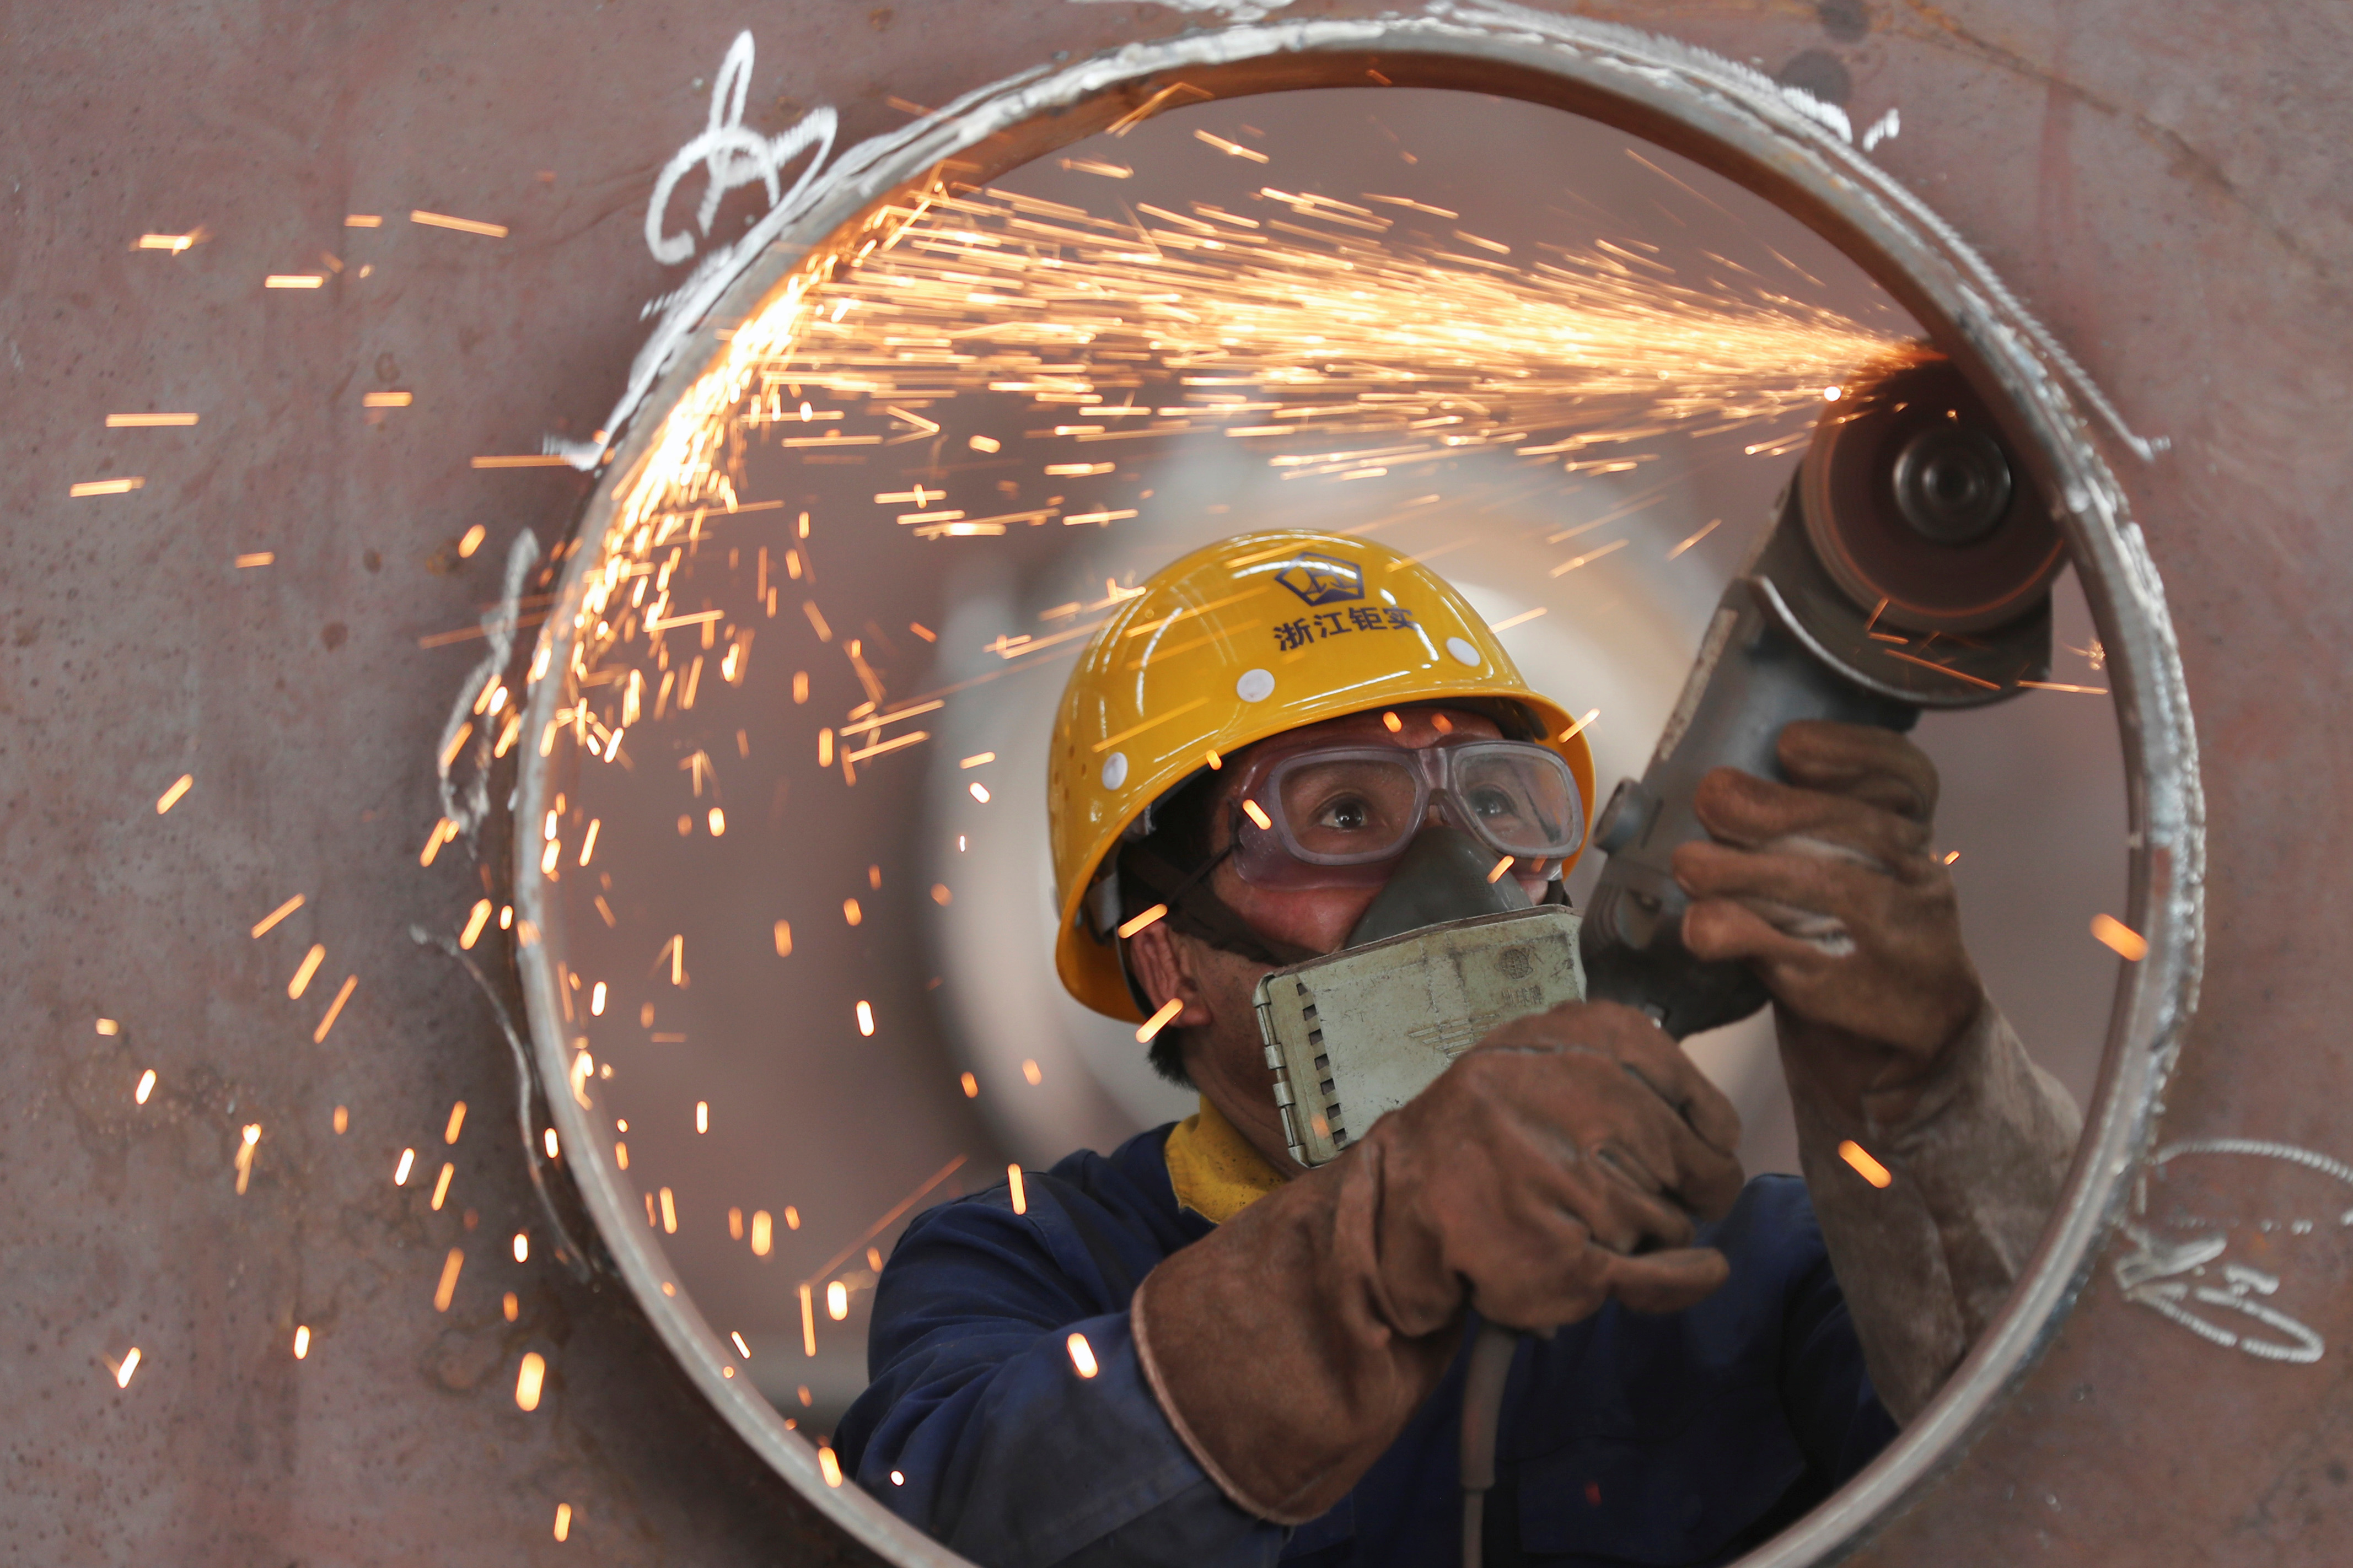 Employees work on a production line manufacturing steel structures at a factory in Huzhou City.